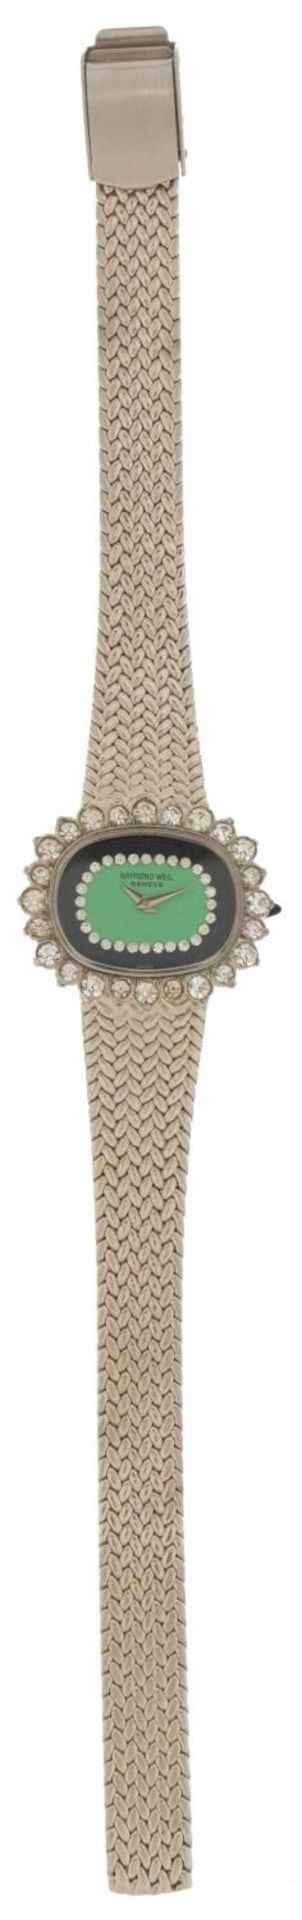 Raymond Weil, ladies wristwatch with clear stone bezel, 29mm wide : For further information on - Image 2 of 5